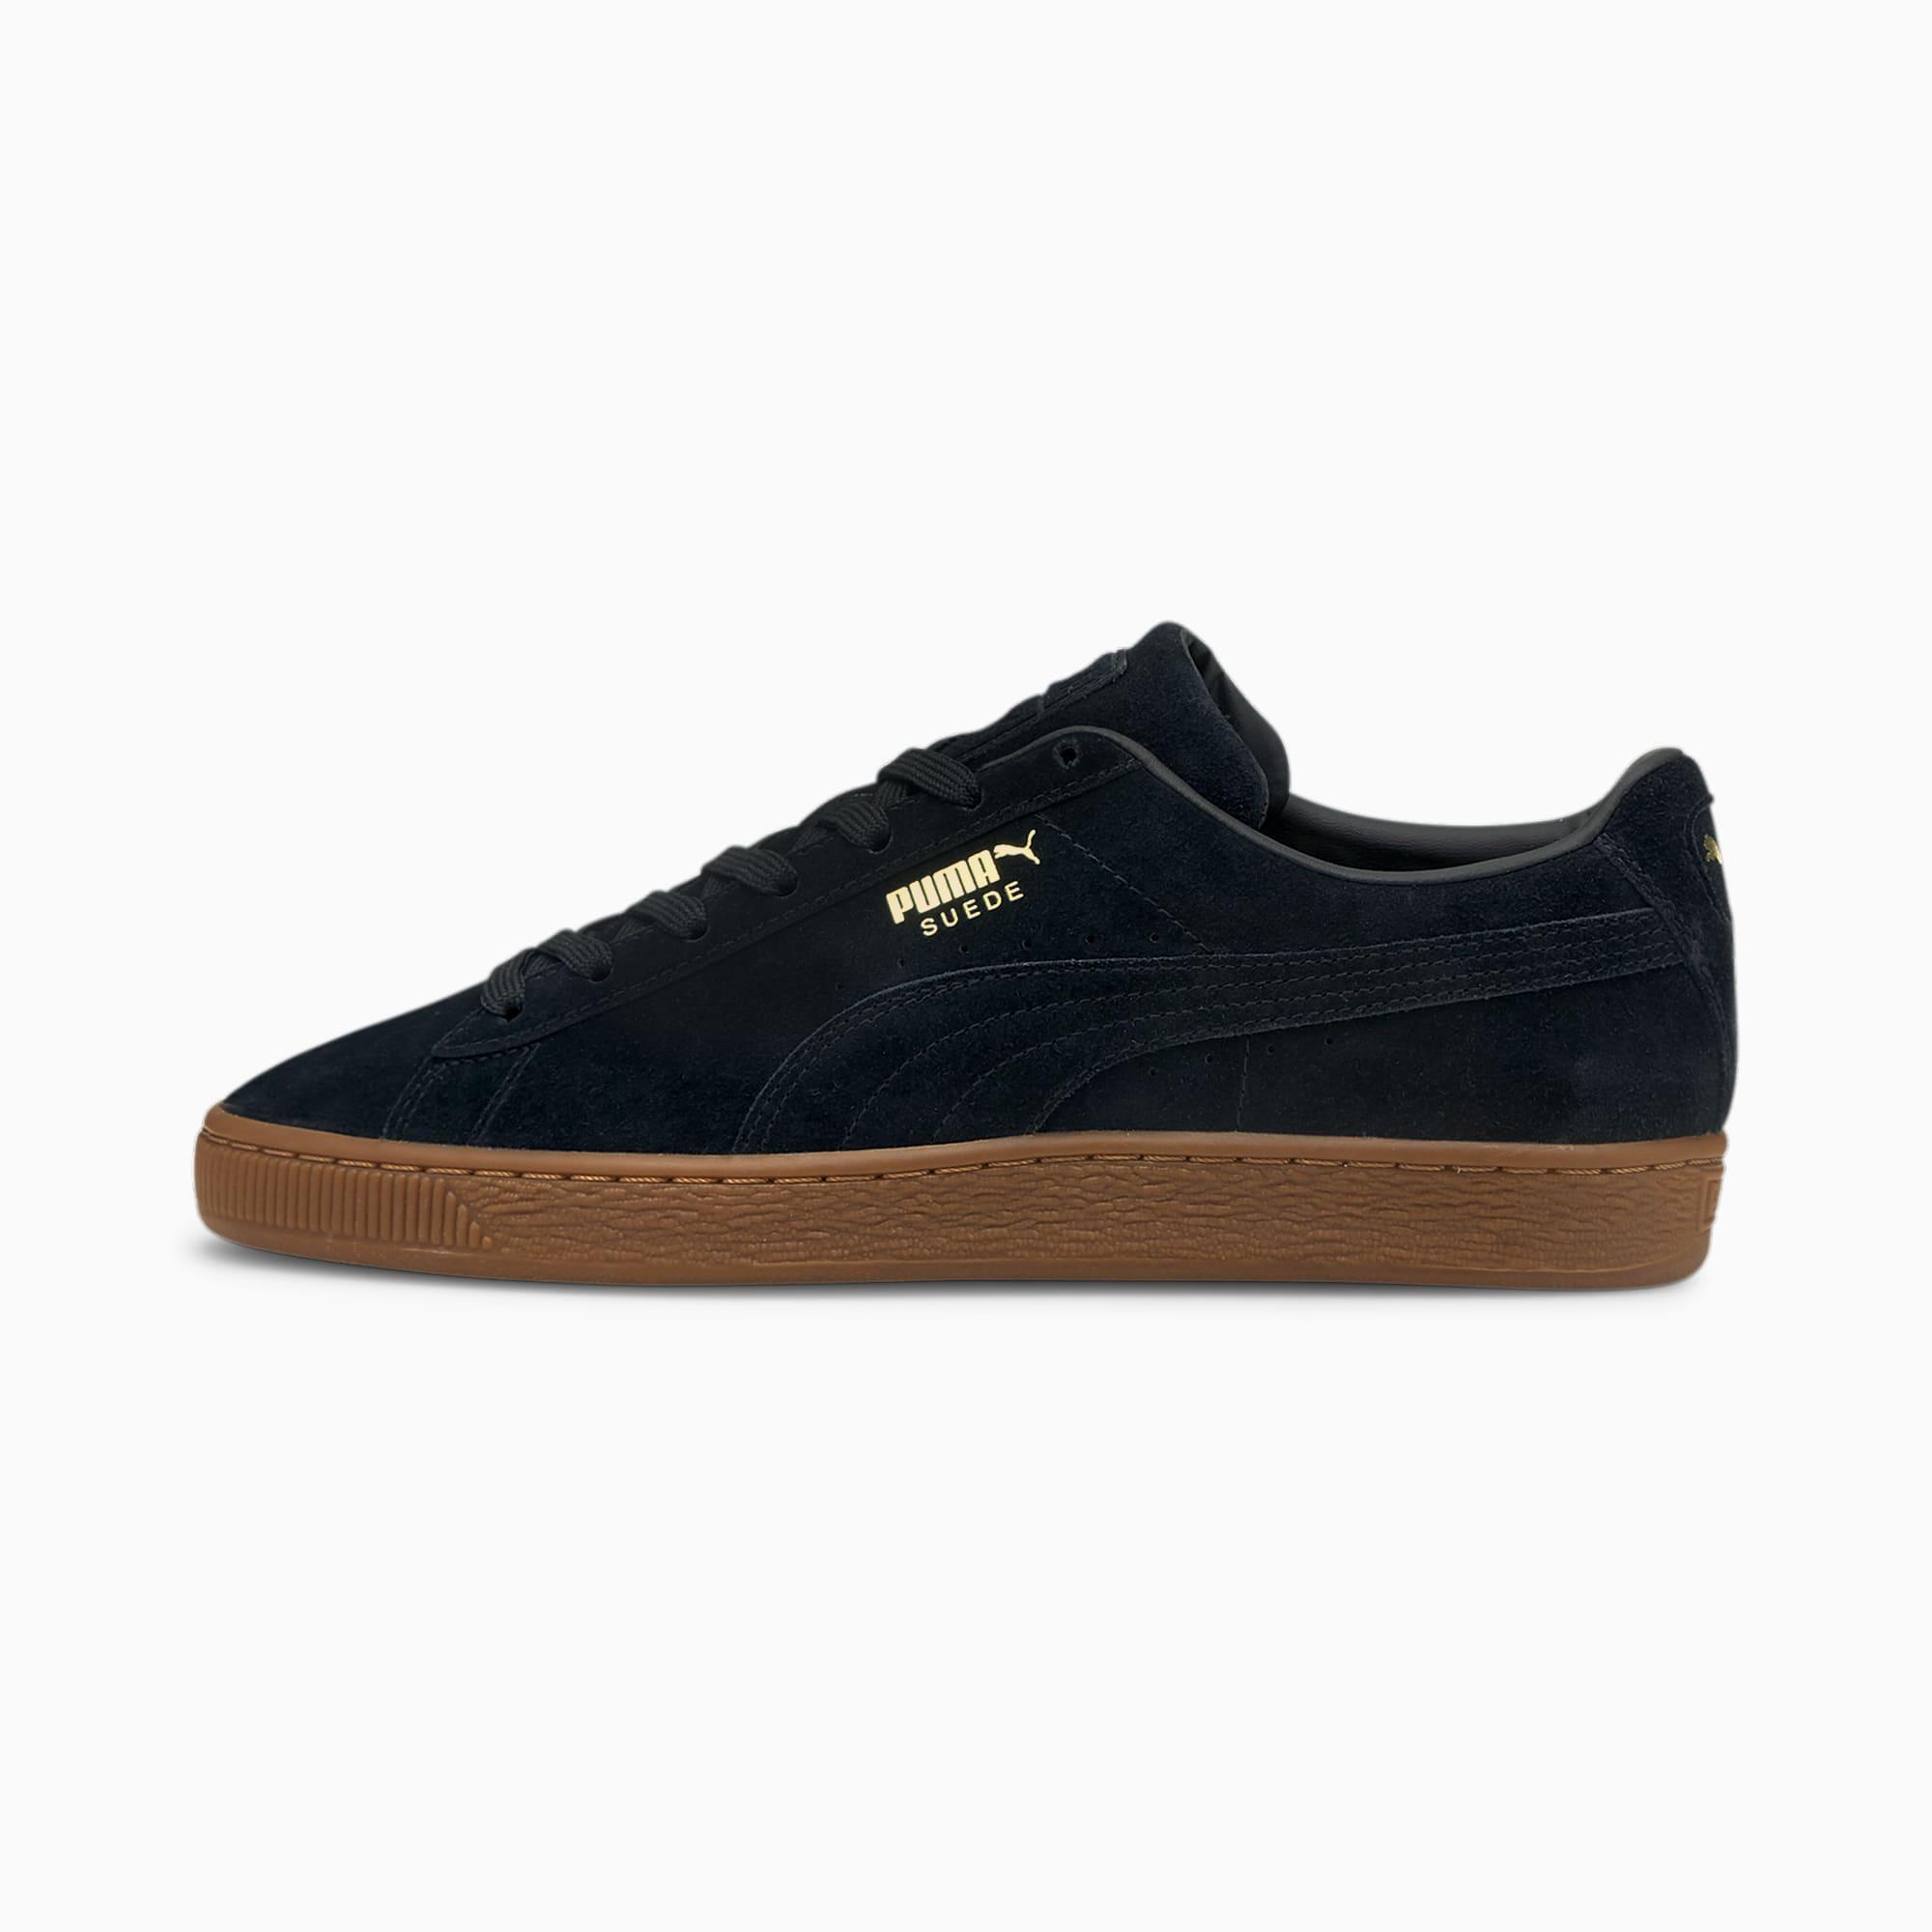 Suede Gum Sneakers Product Image